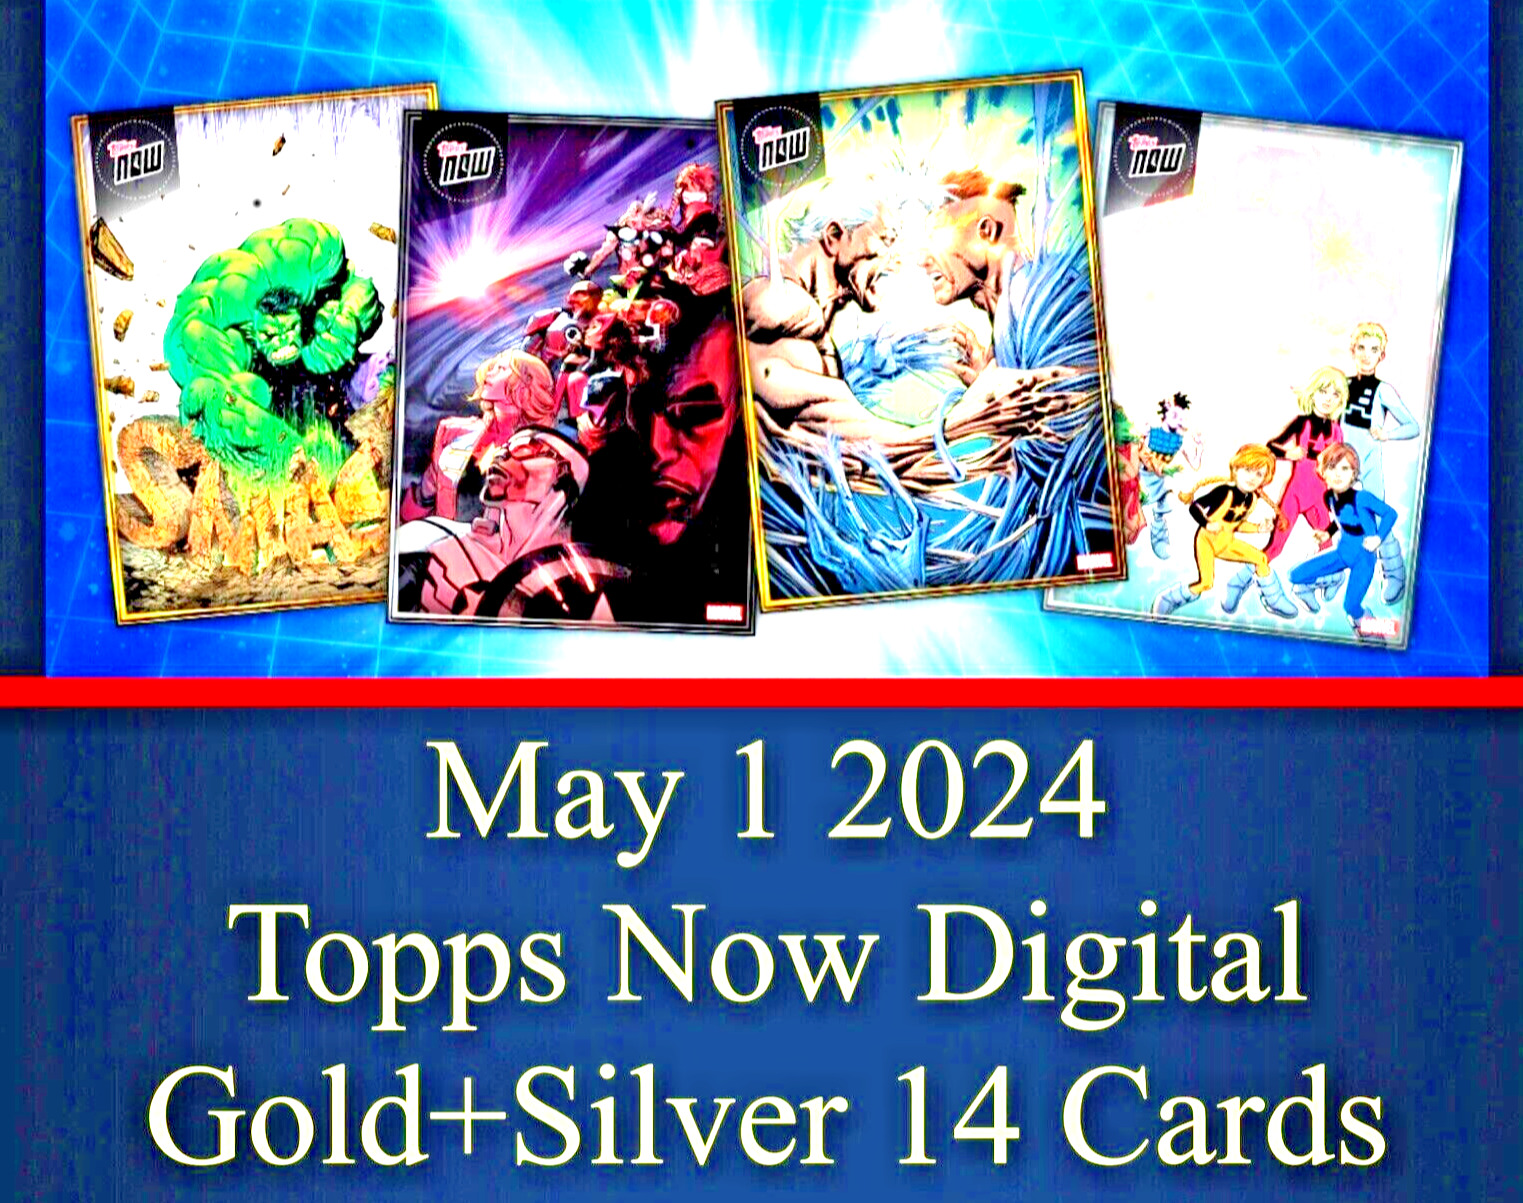 TOPPS MARVEL COLLECT TOPPS NOW MAY 1 2024 GOLD+SILVER 14 CARD SET